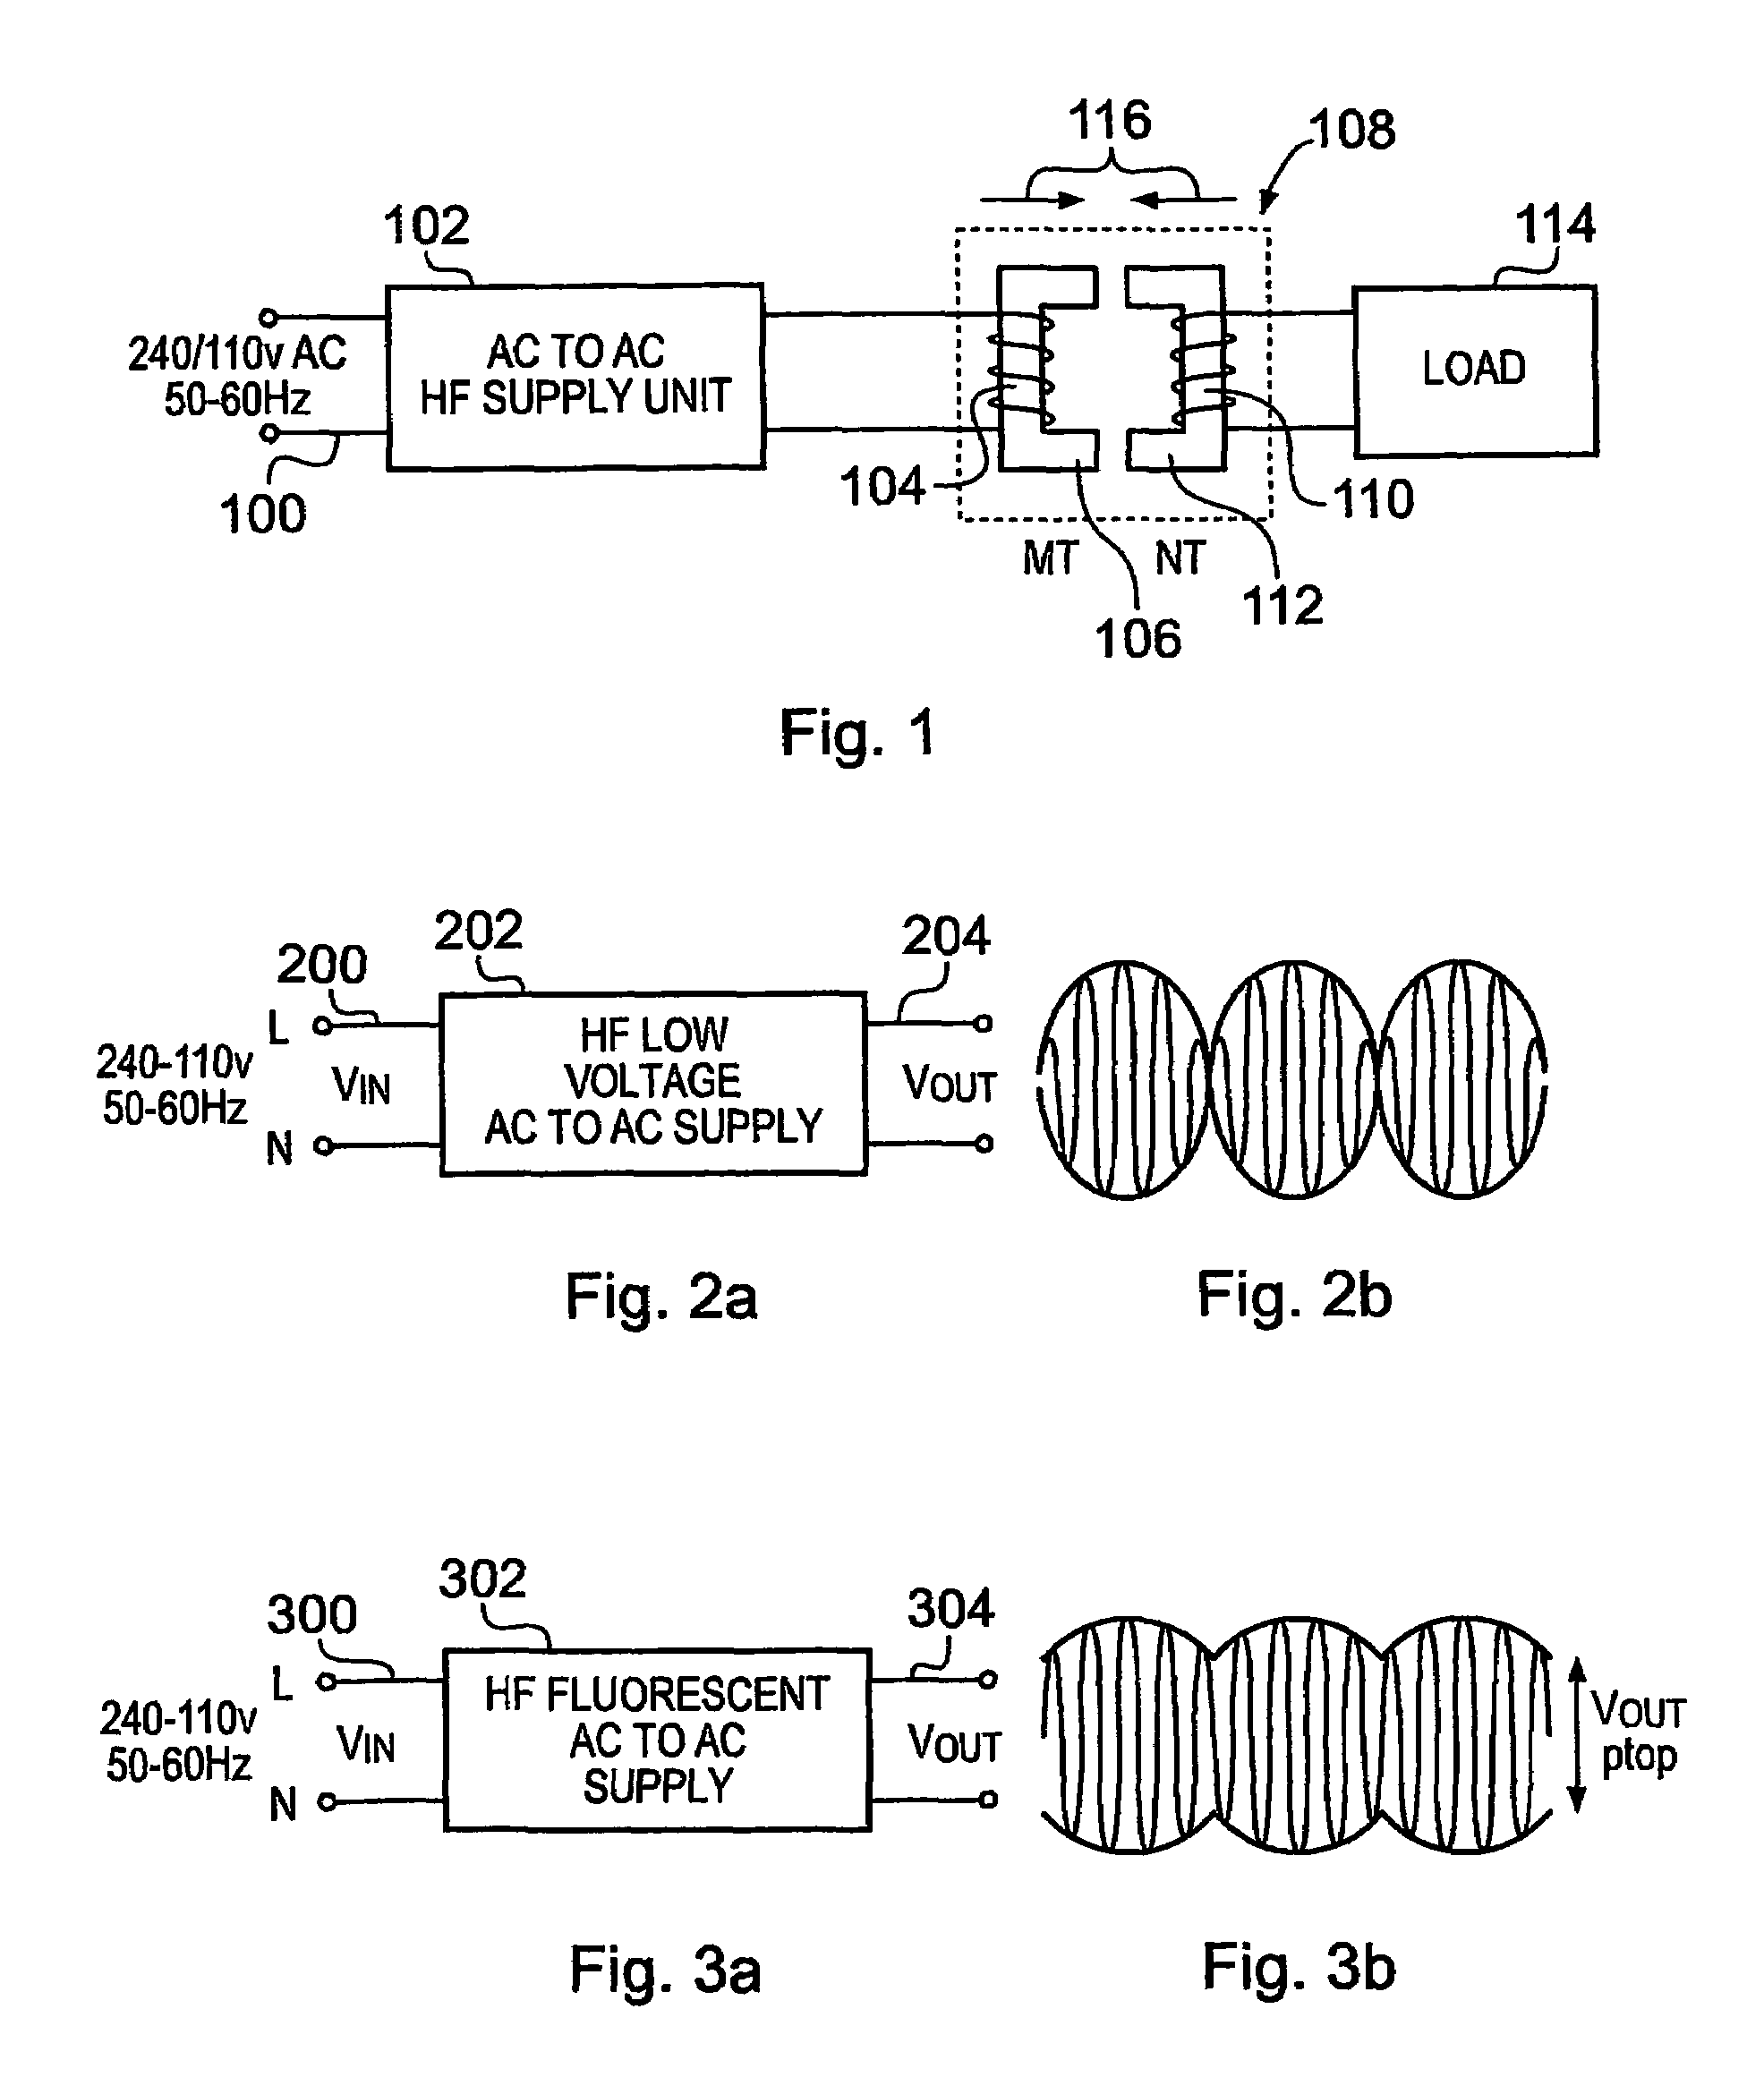 Apparatus for supplying energy to a load and a related system